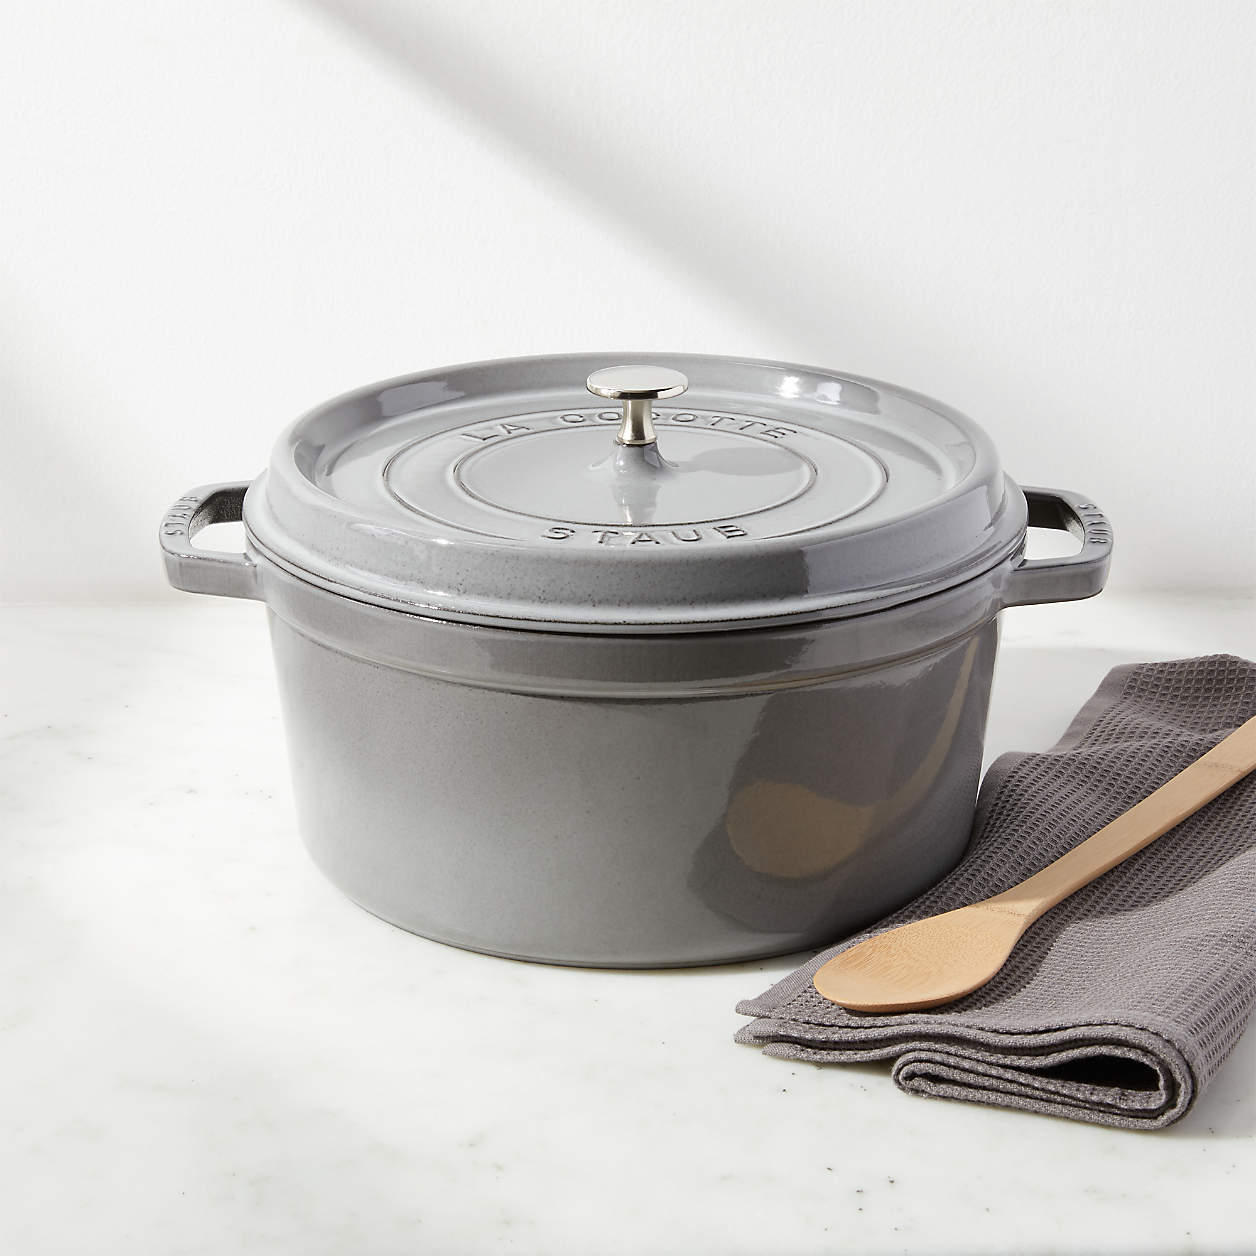 grey dutch oven on marble countertop with towel and wooden spoon.